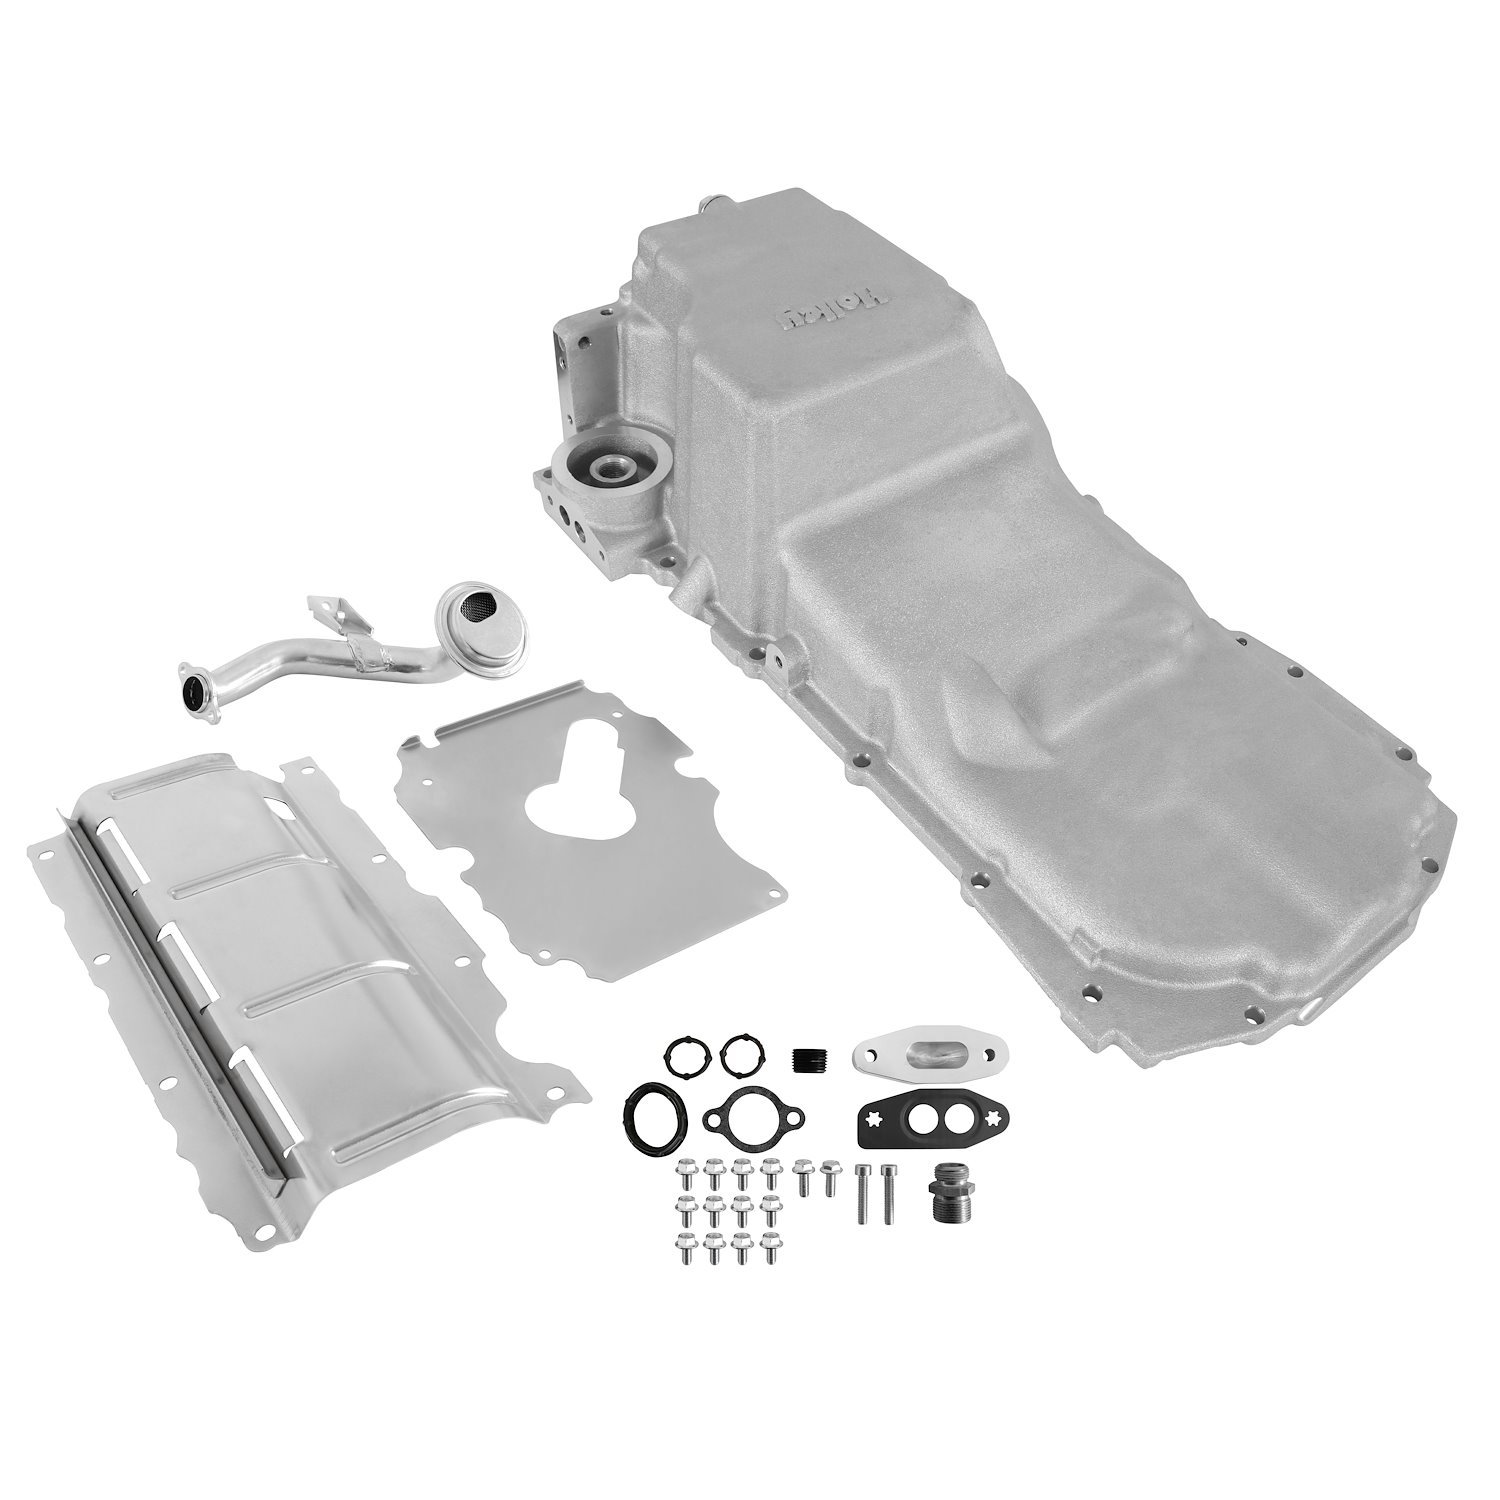 302-24 GM Gen V LT Engine Swap Oil Pan Kit for 1973-1987 GM 4WD Trucks and Various 4WD Vehicles [Natural Finish]